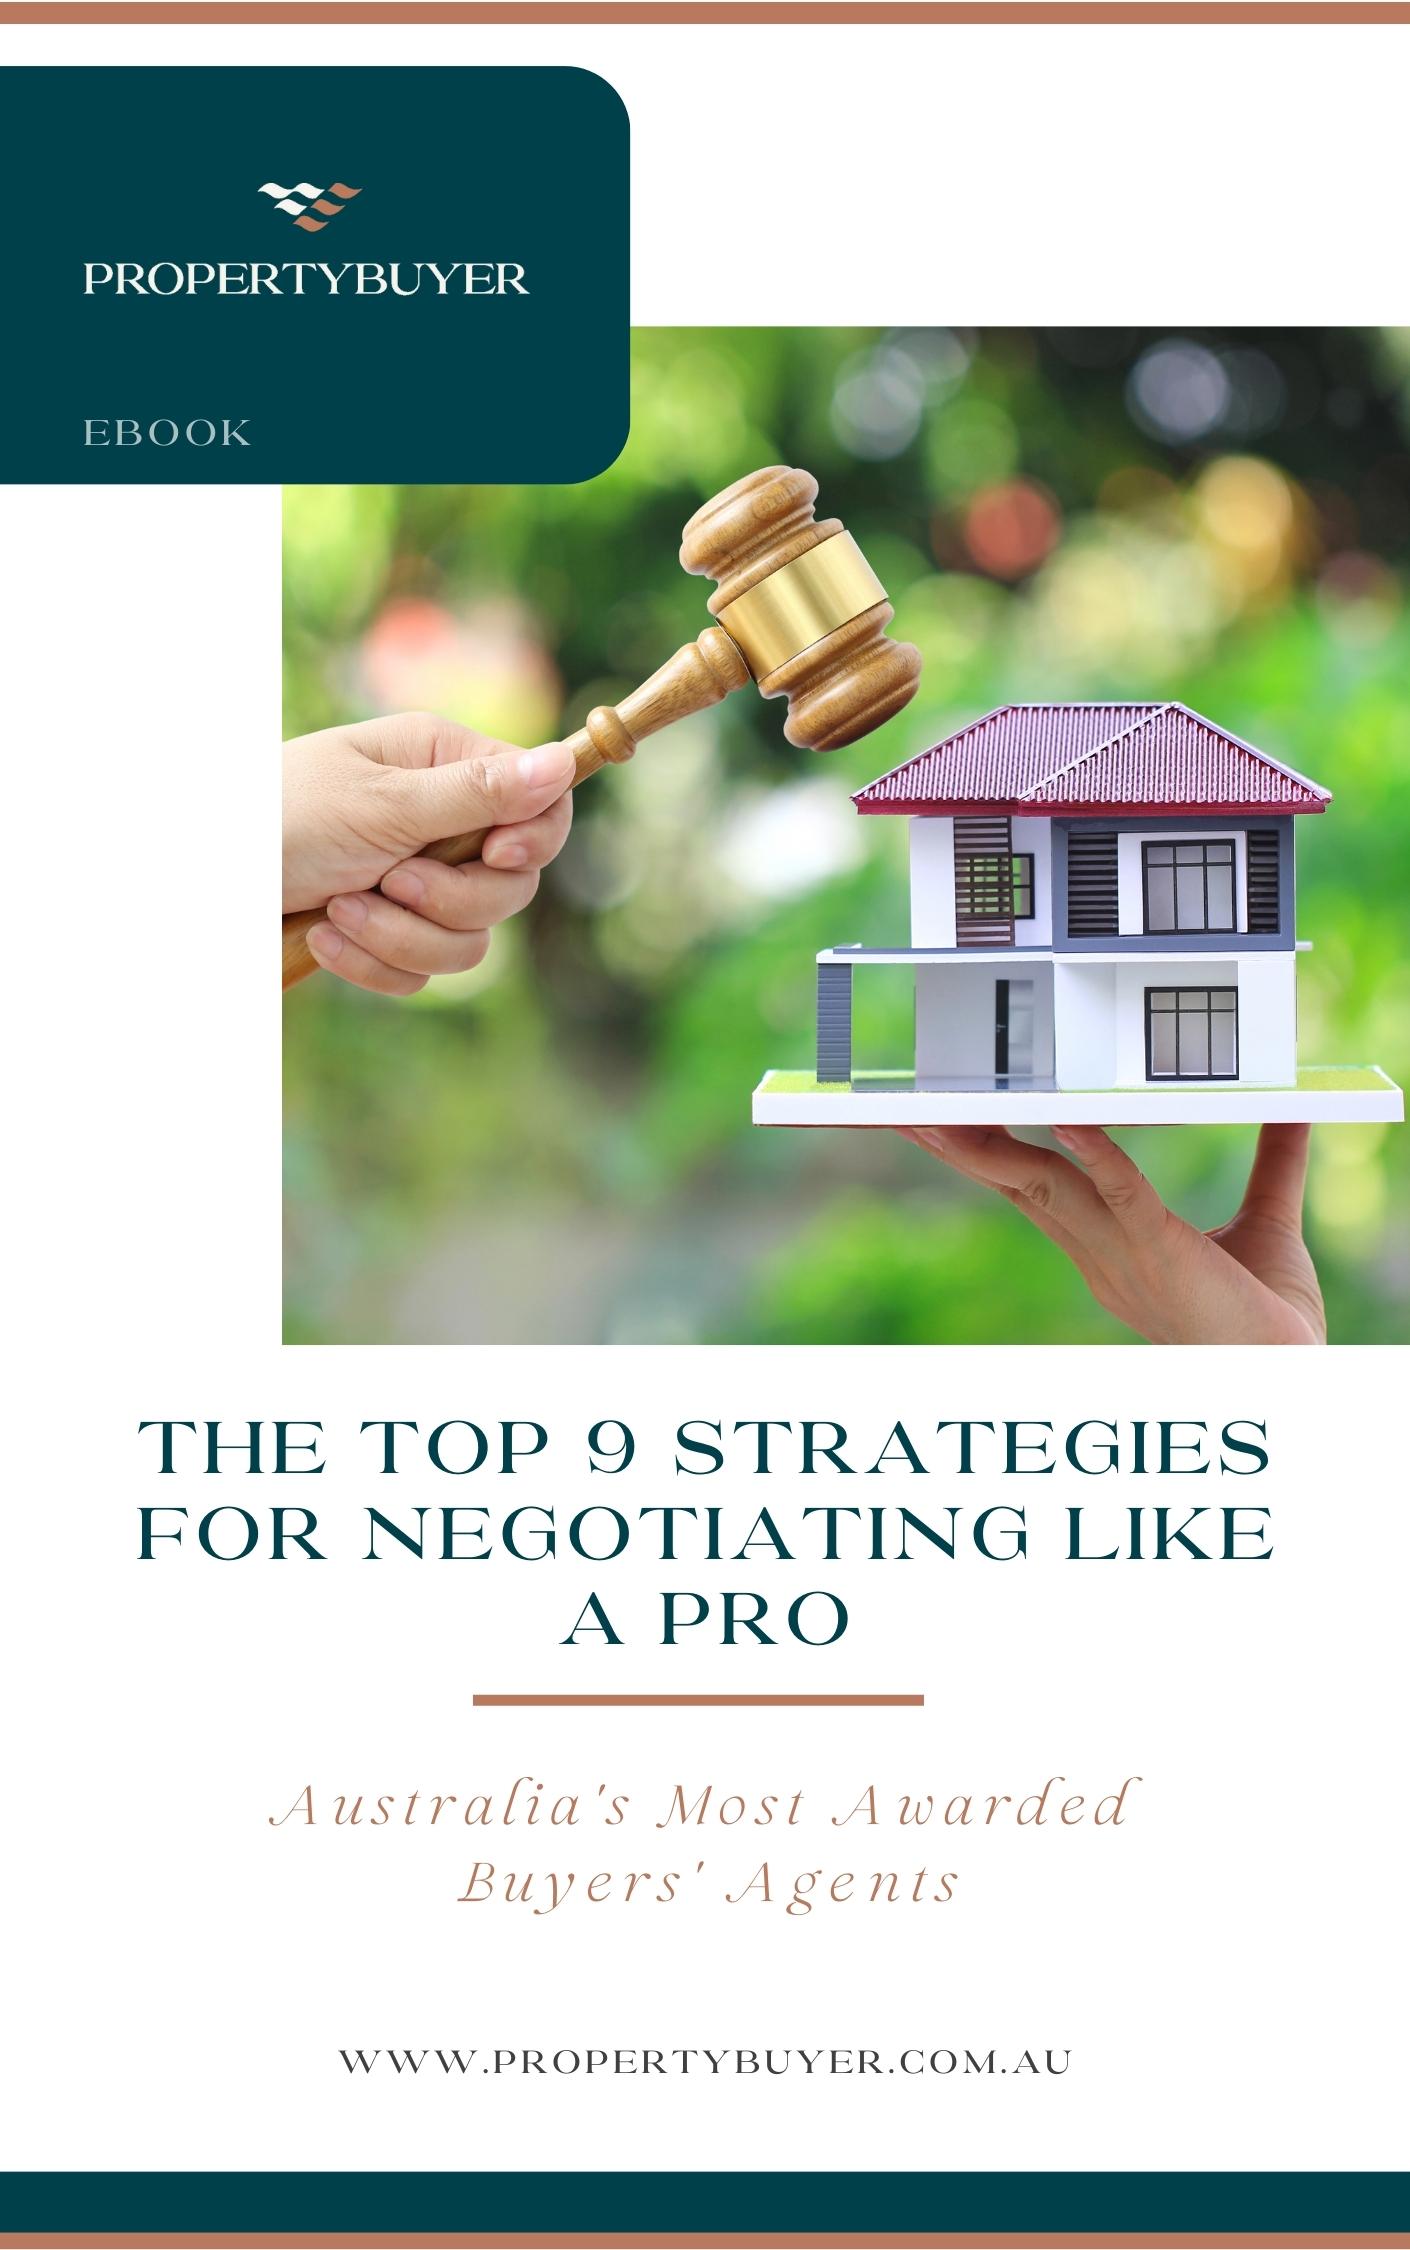 The Top 9 Strategies for Negotiating Like a Pro